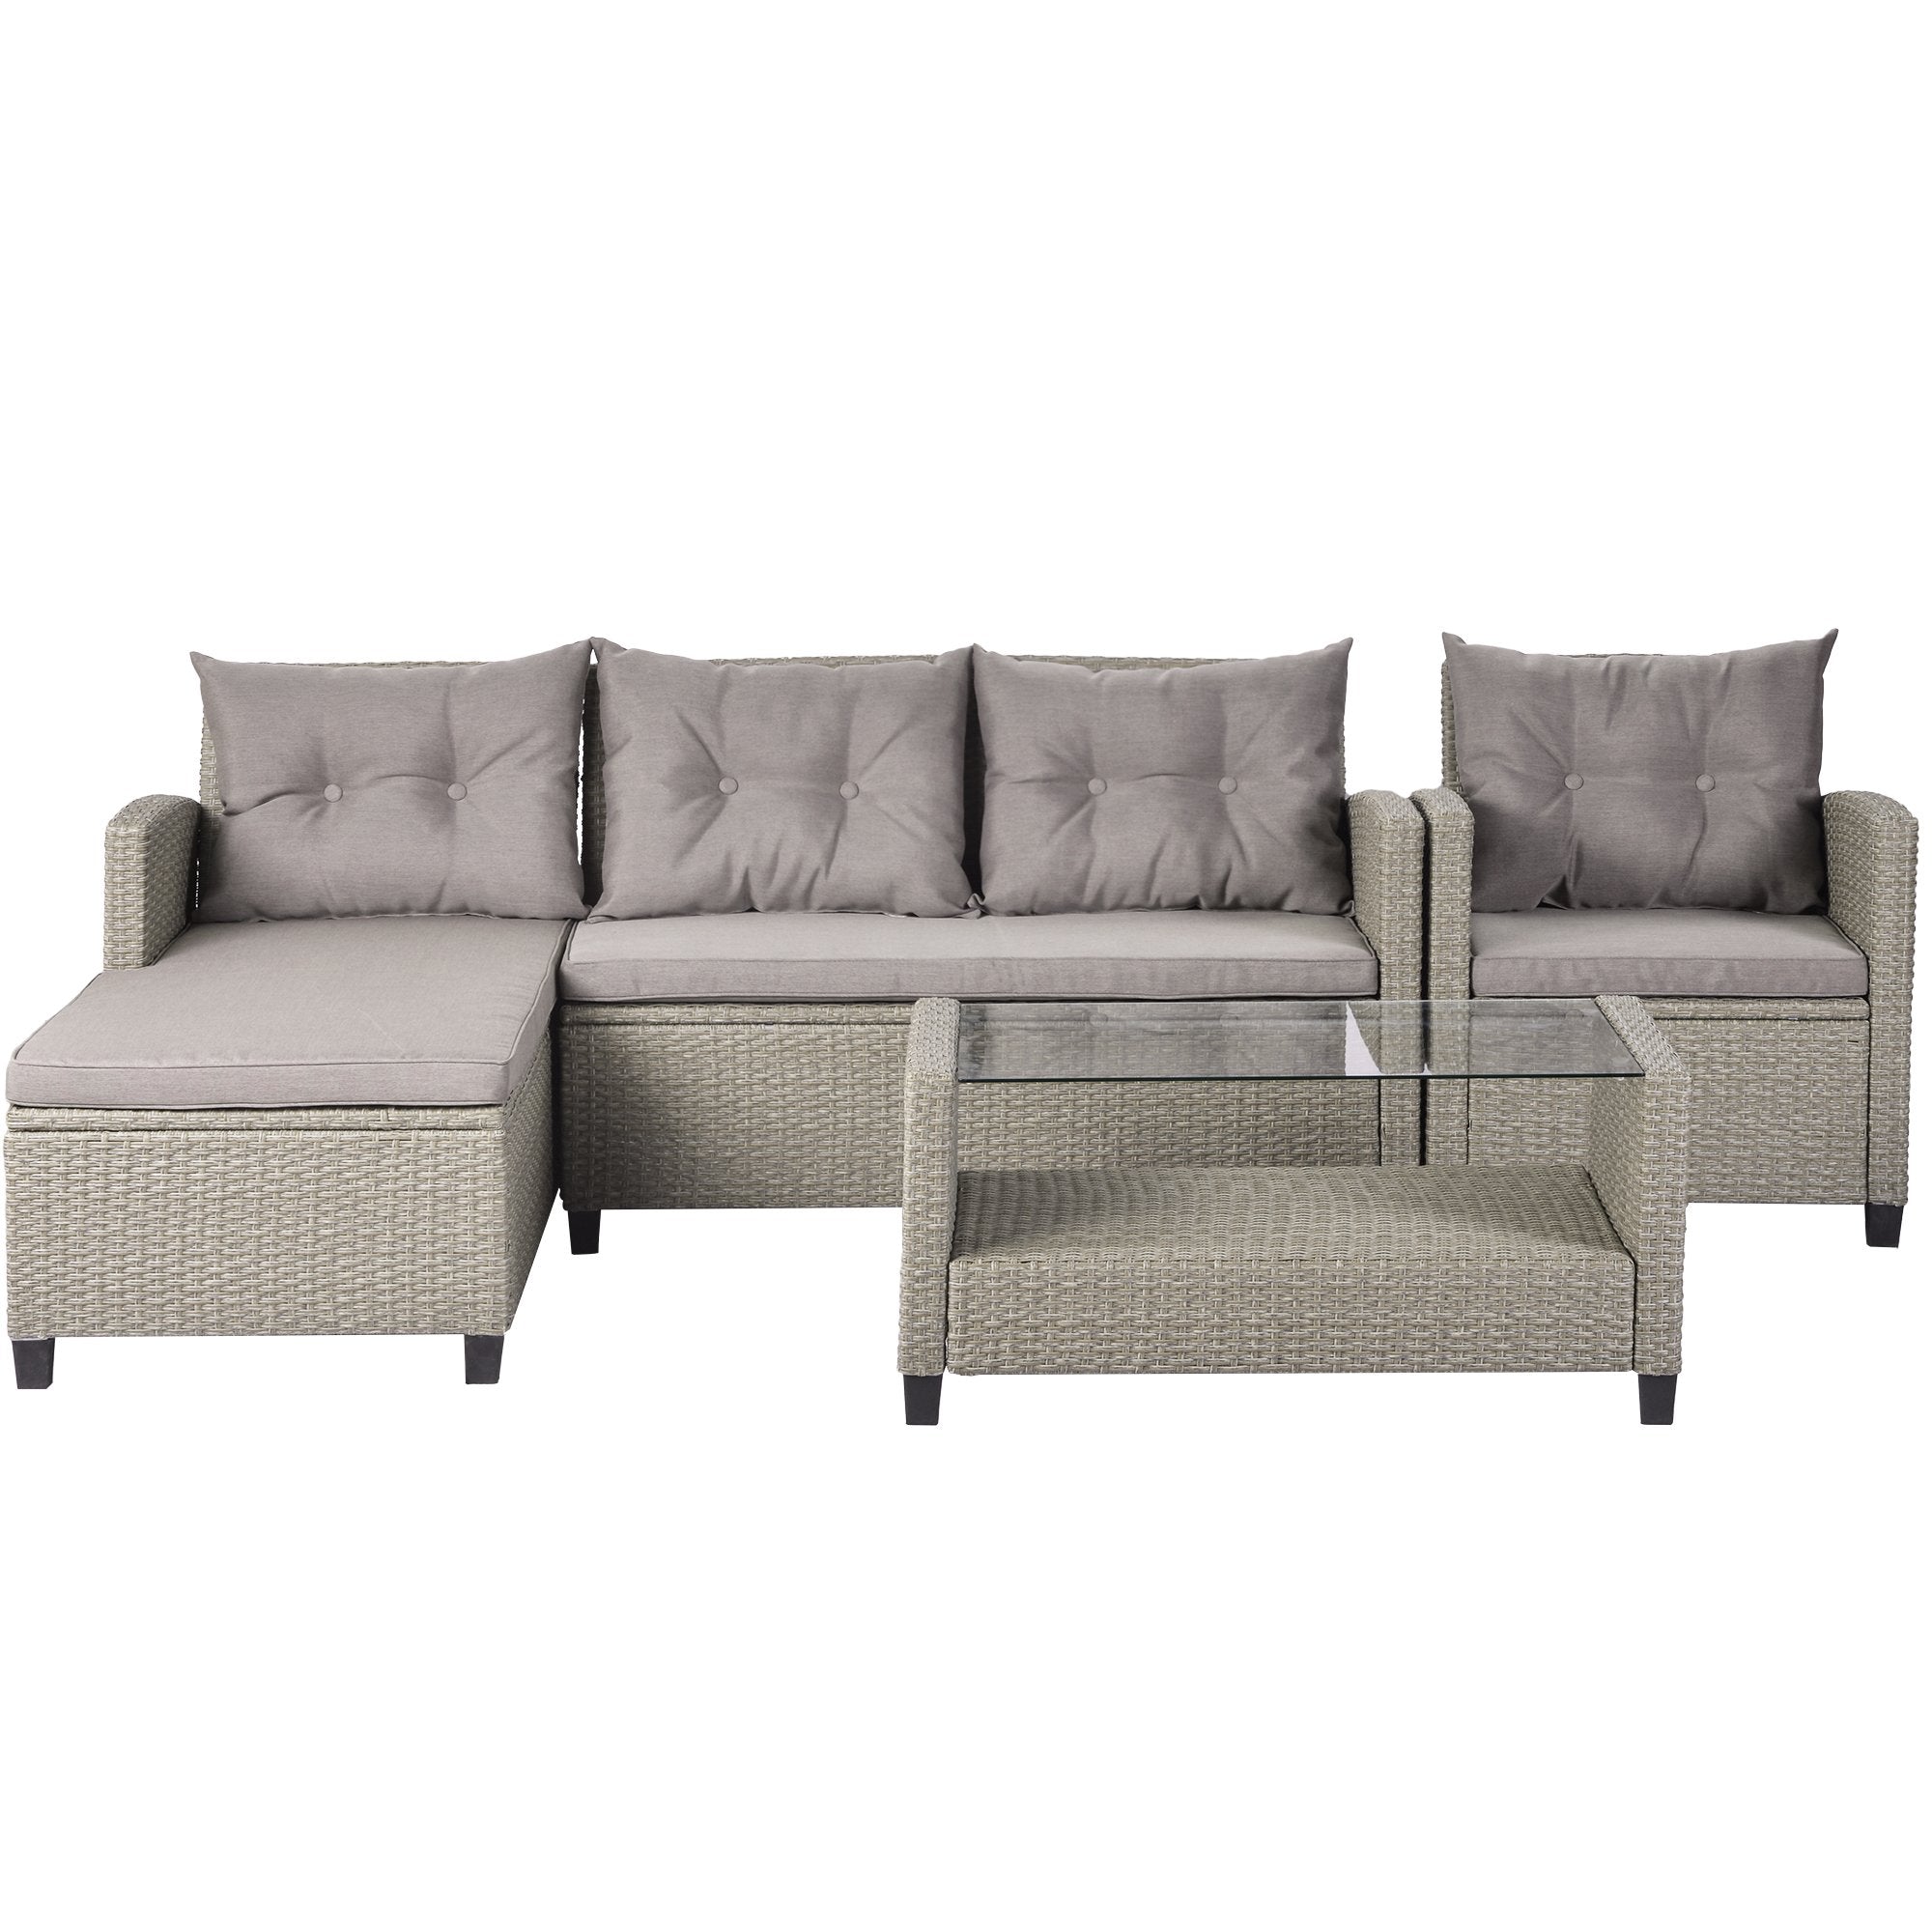 Outdoor, Patio Furniture Sets, 4 Piece Conversation Set Wicker Ratten Sectional Sofa with Seat Cushions-Boyel Living